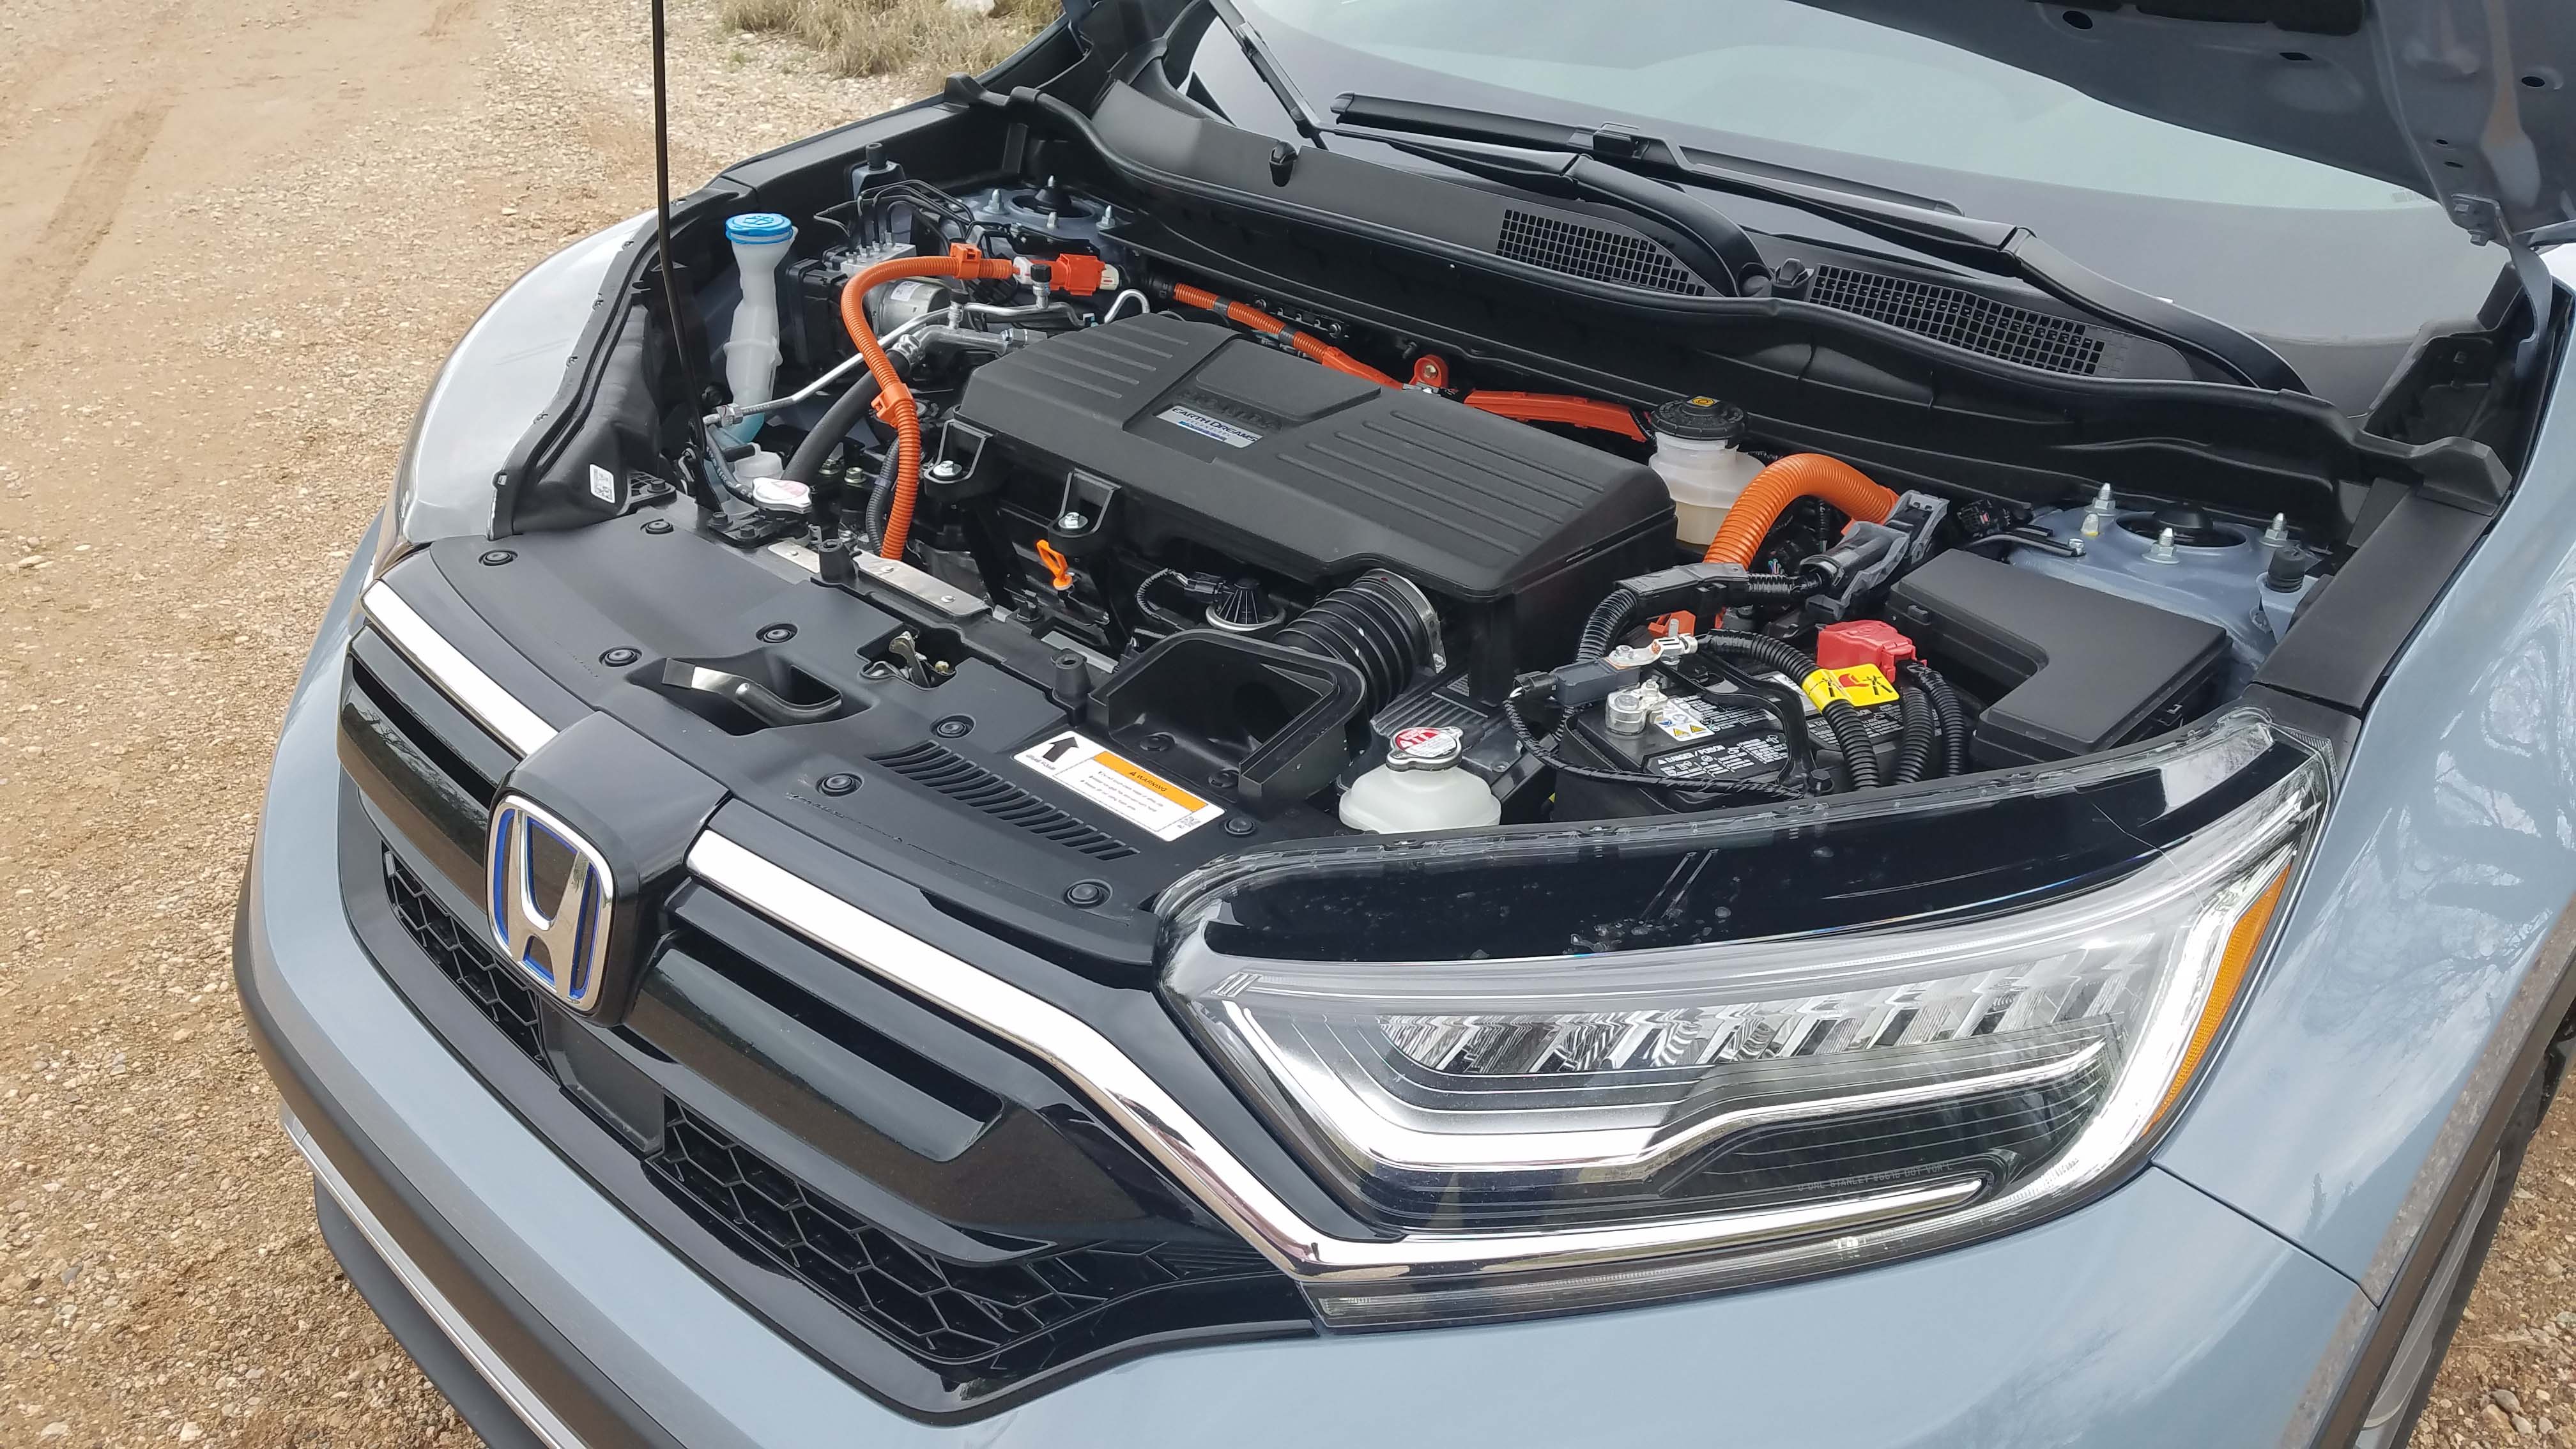 Under the hood of the 2020 Honda CR-V Hybrid is a 2.0-liter 4-cylinder engine mated to an AC motor.